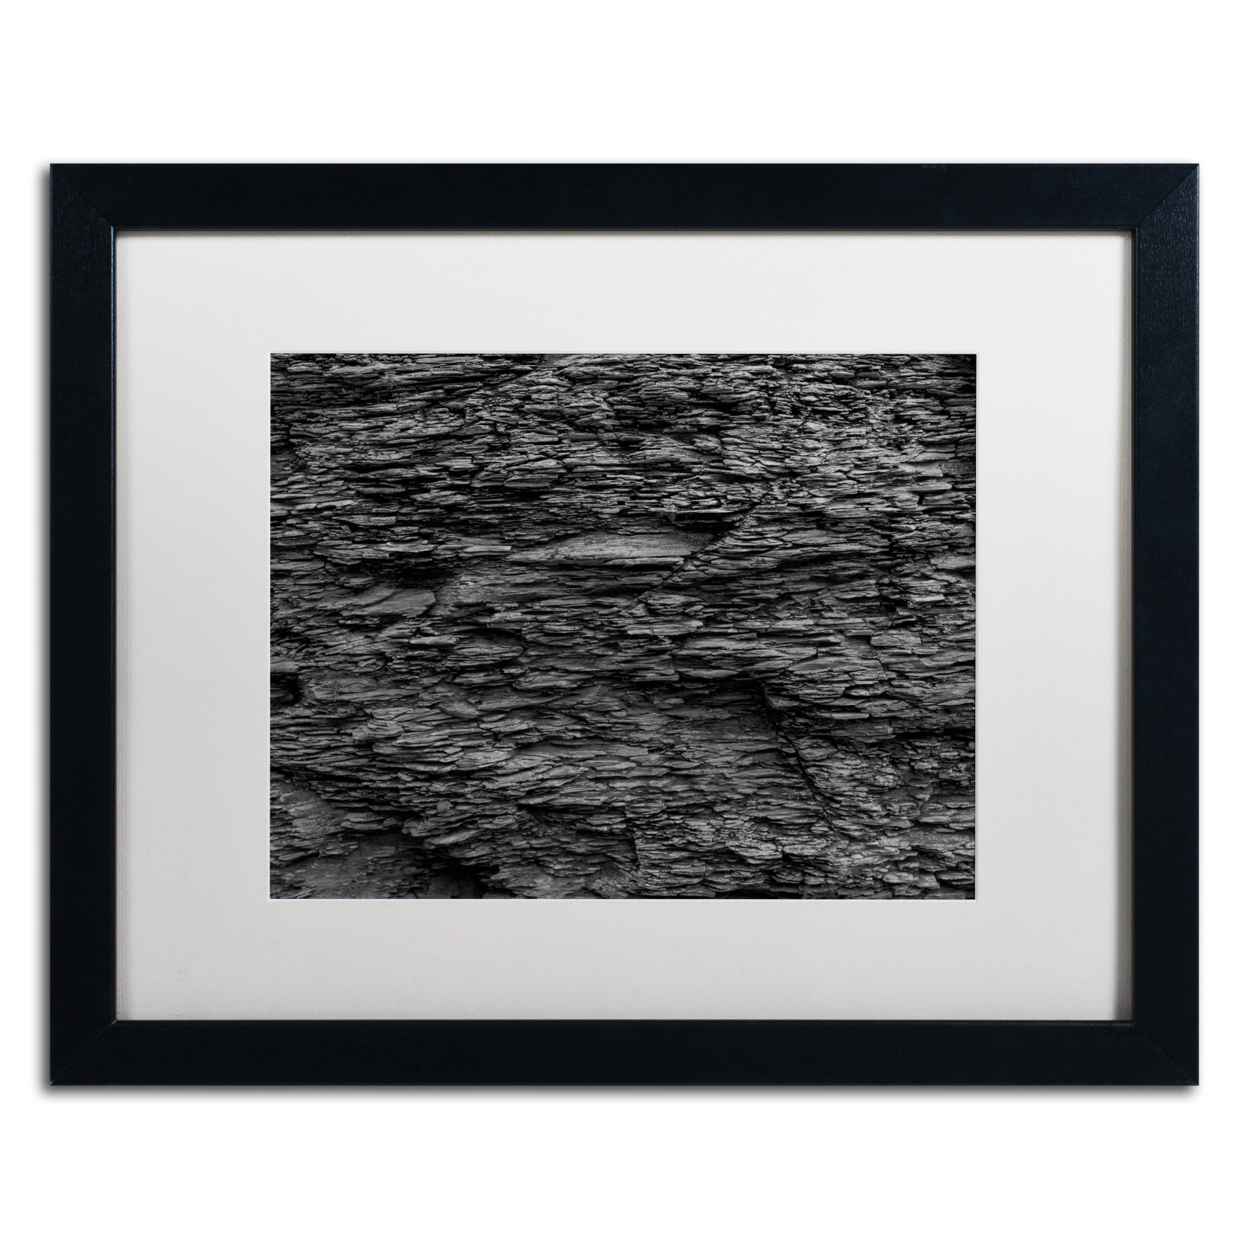 Kurt Shaffer 'Shale Abstract In Black And White' Black Wooden Framed Art 18 X 22 Inches